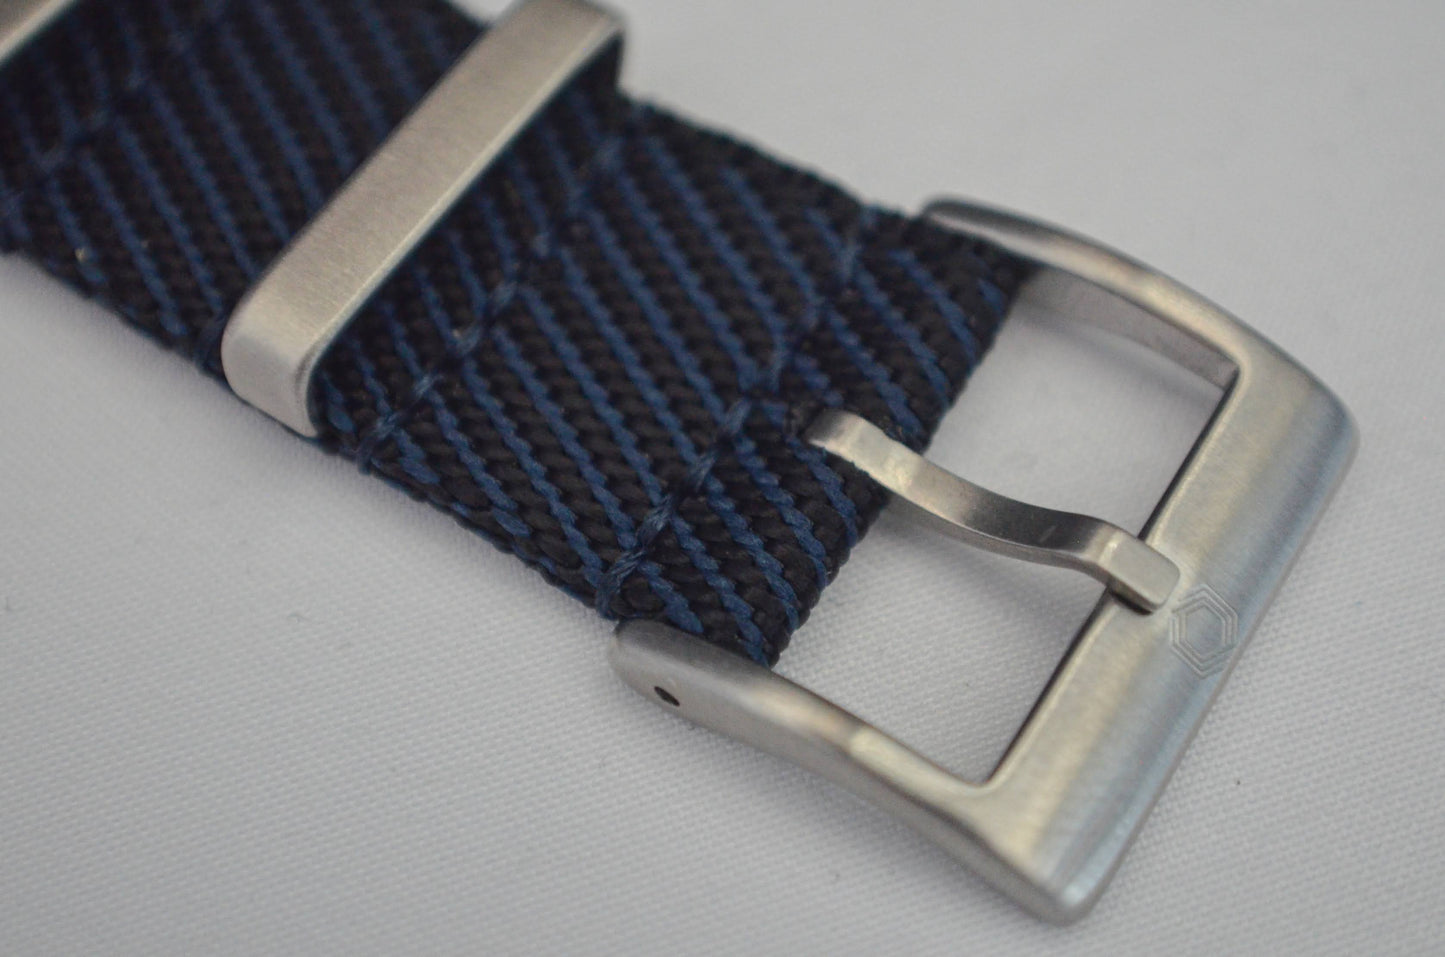 The 'Chatsworth' - Traditional blue military watch strap made of a soft double weaved nylon